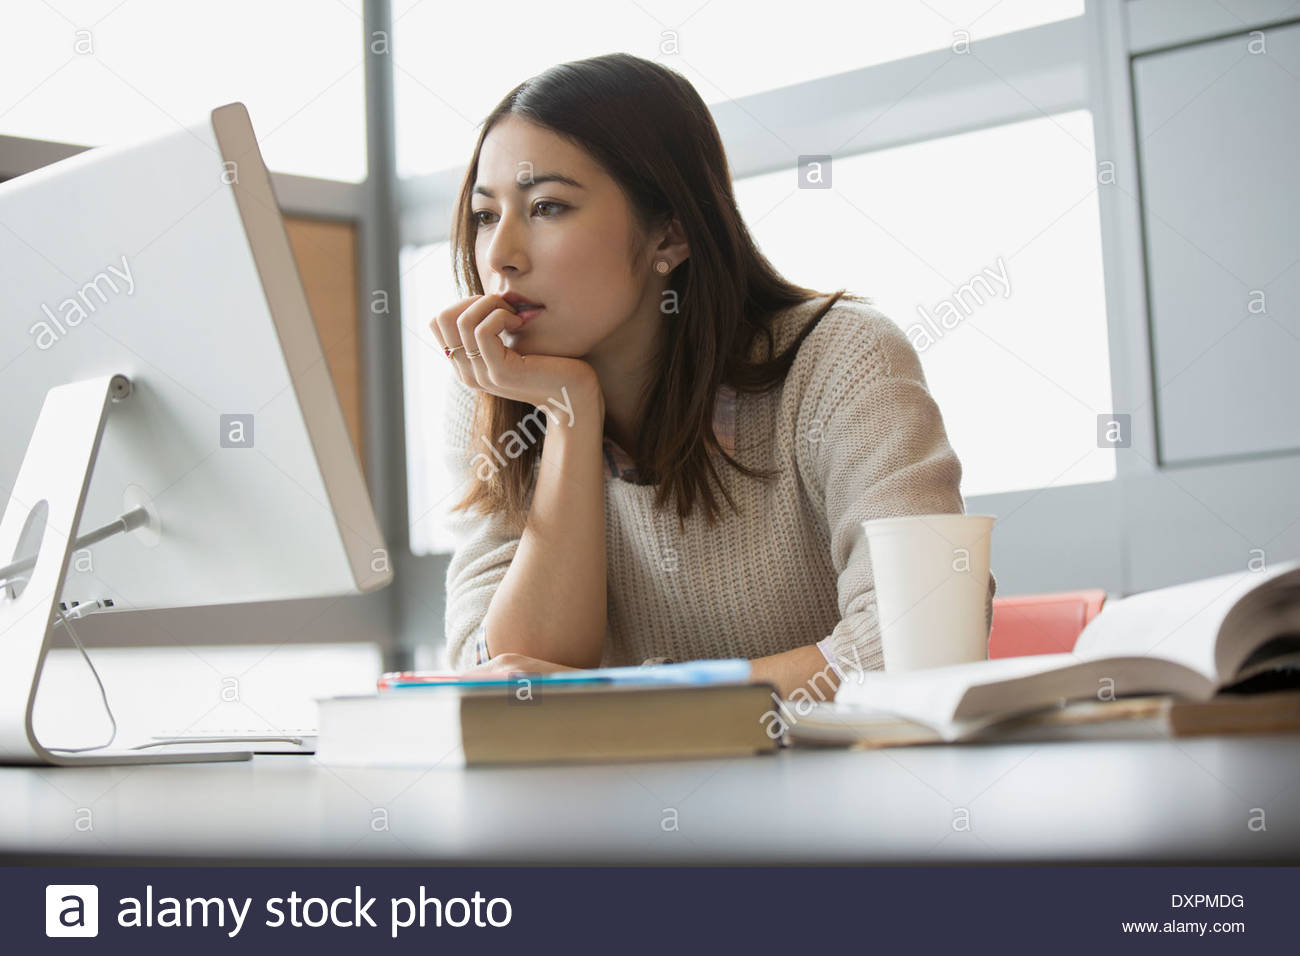 Focused college student studying at computer Stock Photo